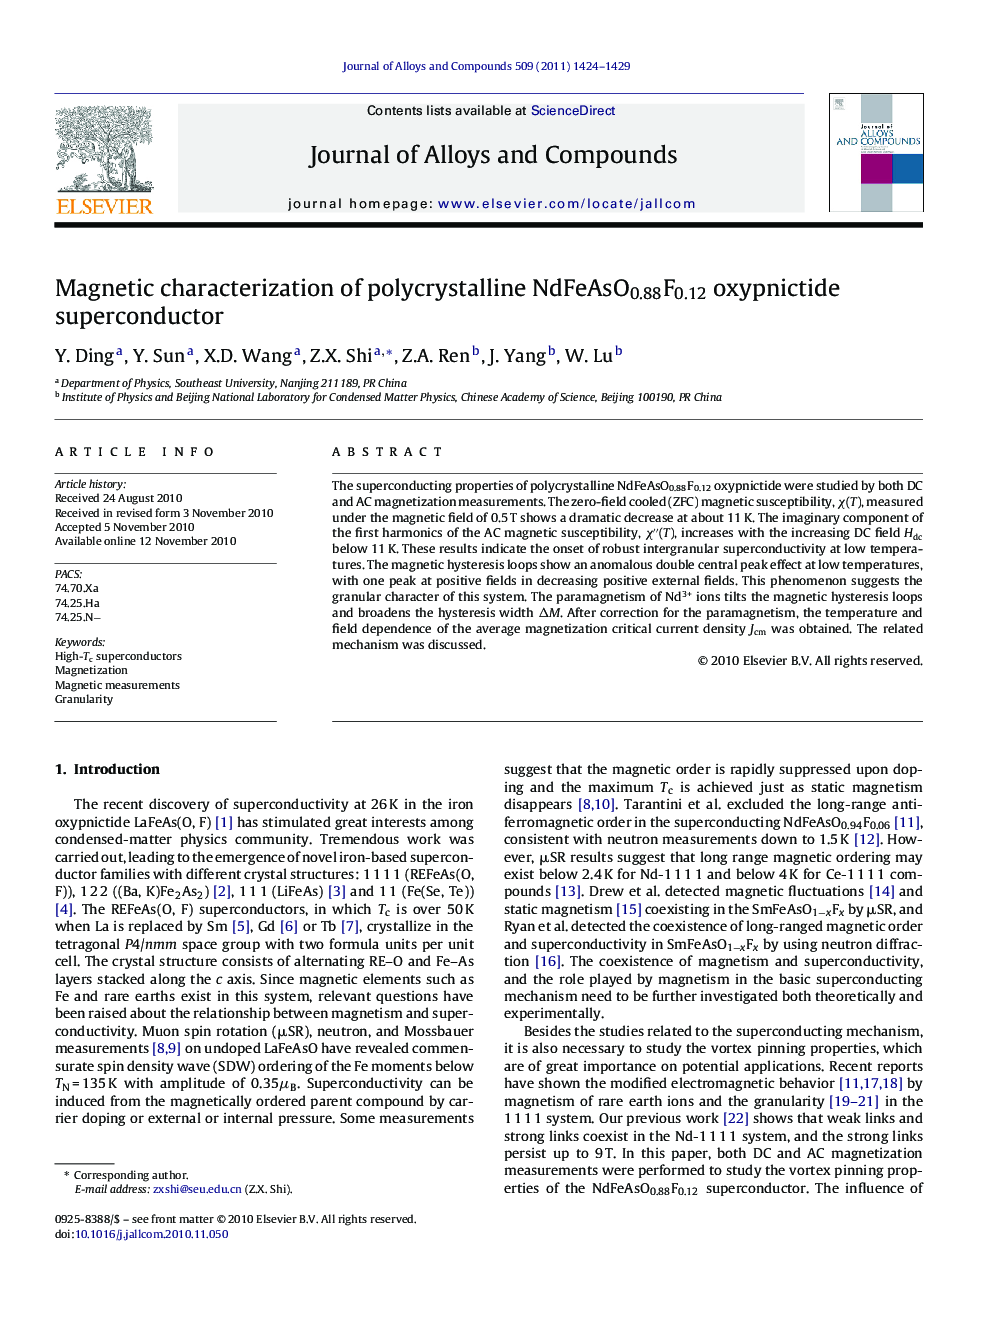 Magnetic characterization of polycrystalline NdFeAsO0.88F0.12 oxypnictide superconductor